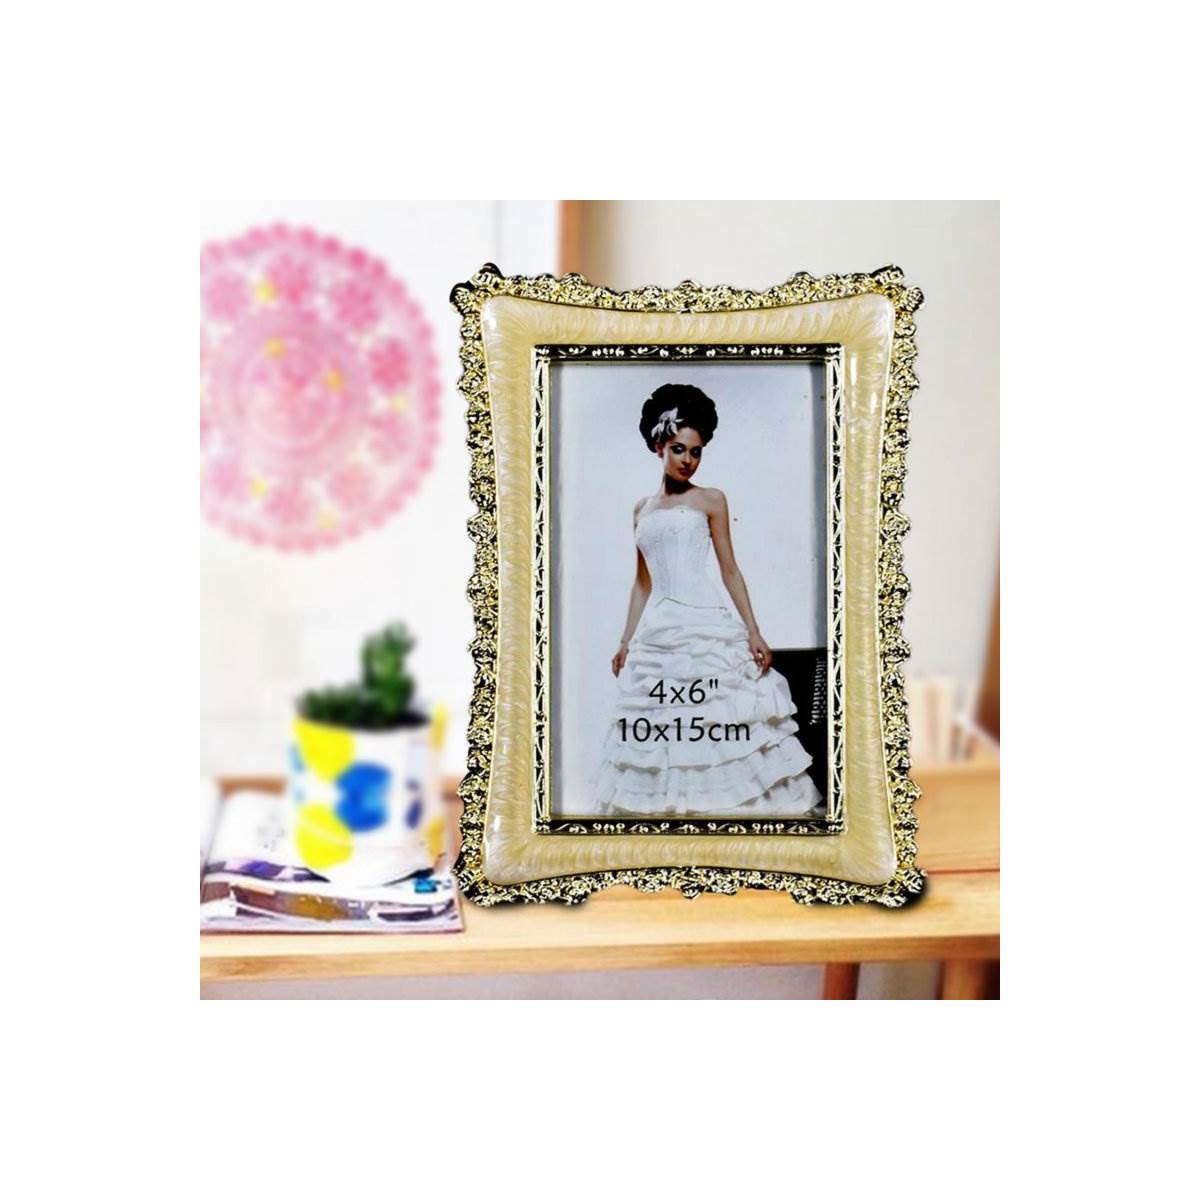 Acrylic Gold textured Photo Frame (4x6) inches (8130)